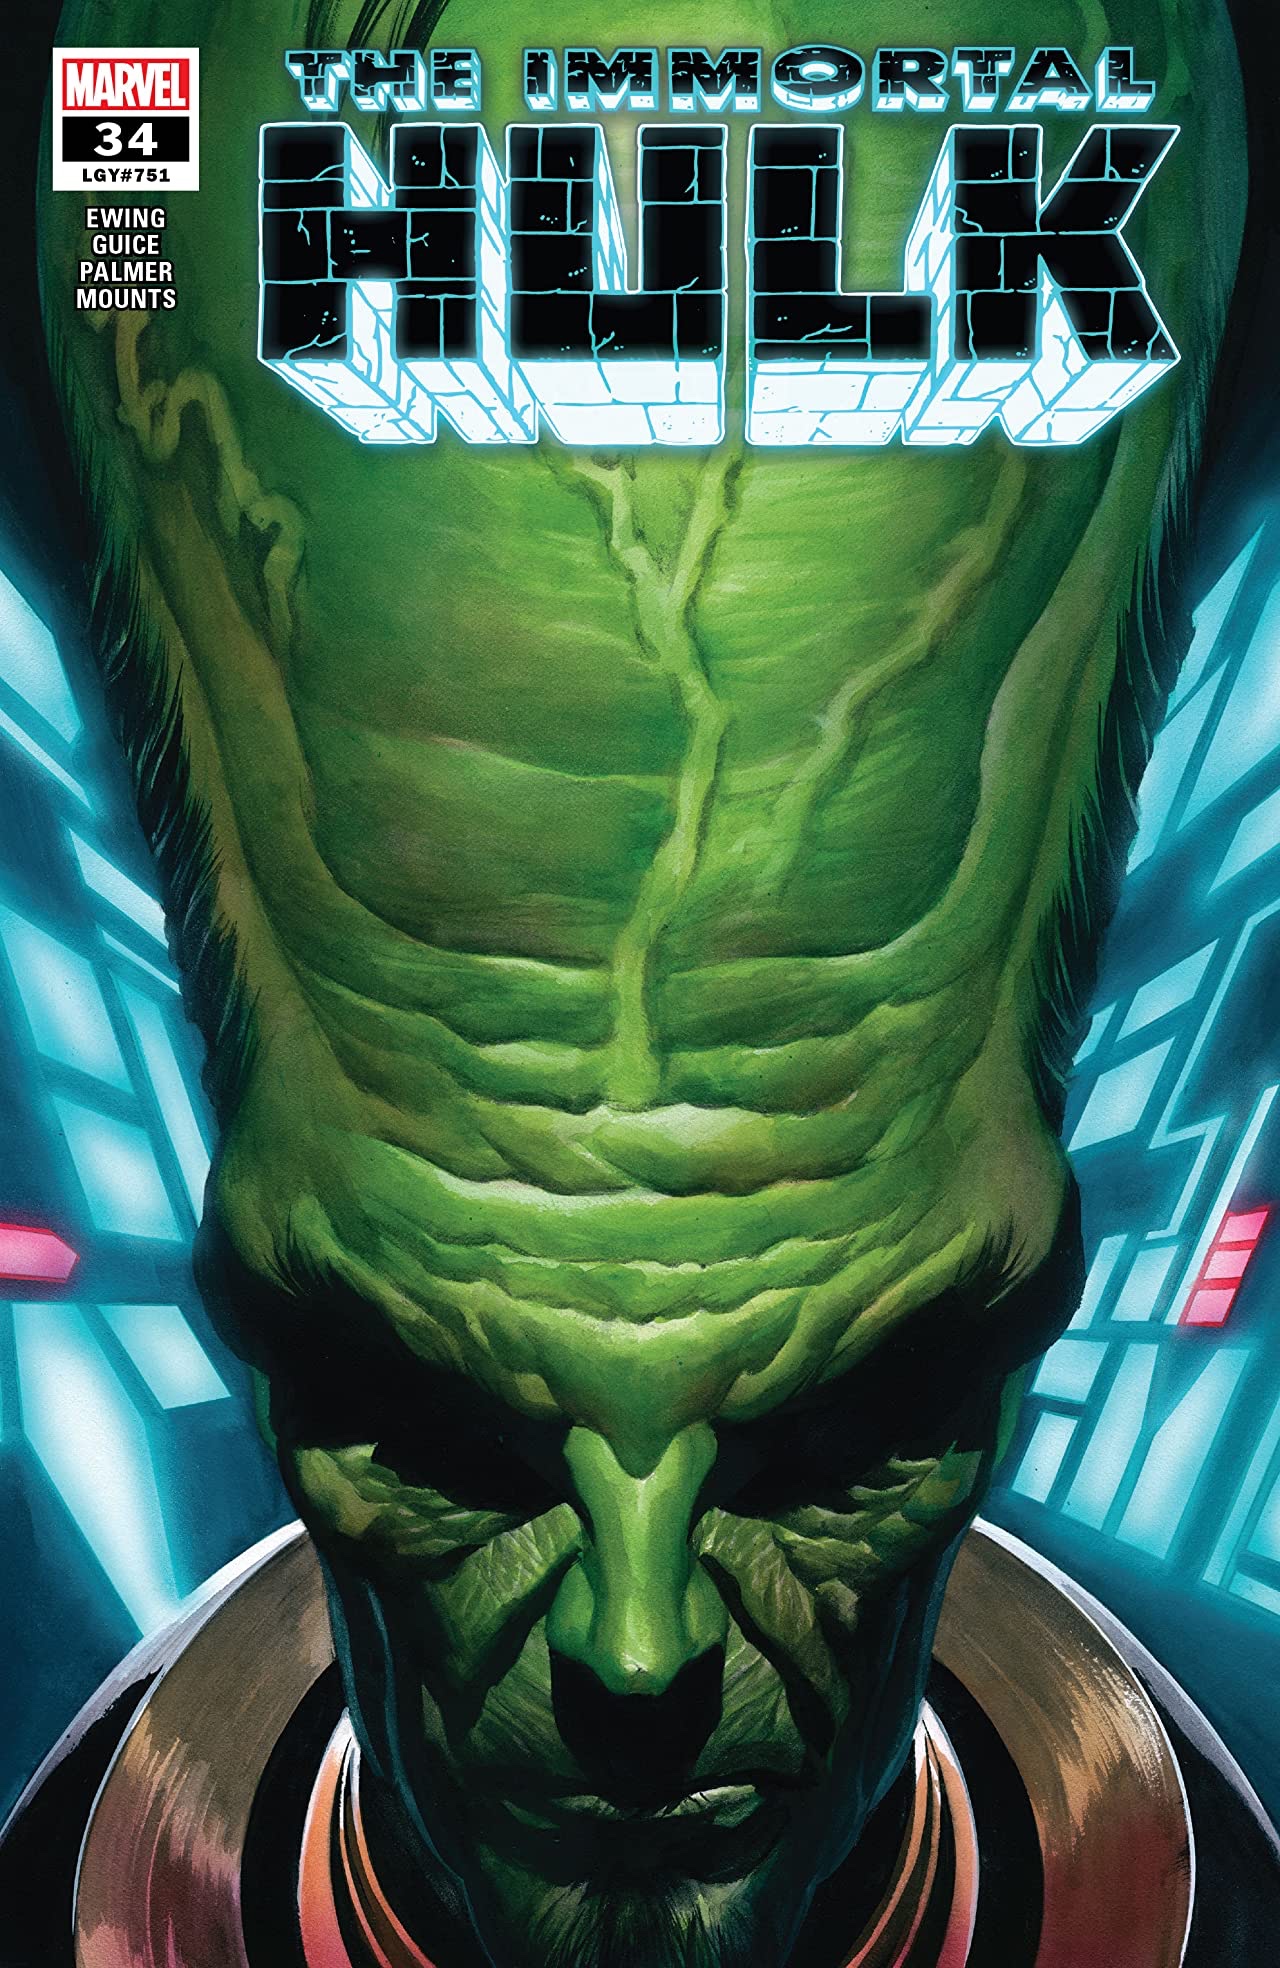 The astounding, unsettling end of Immortal Hulk - Polygon